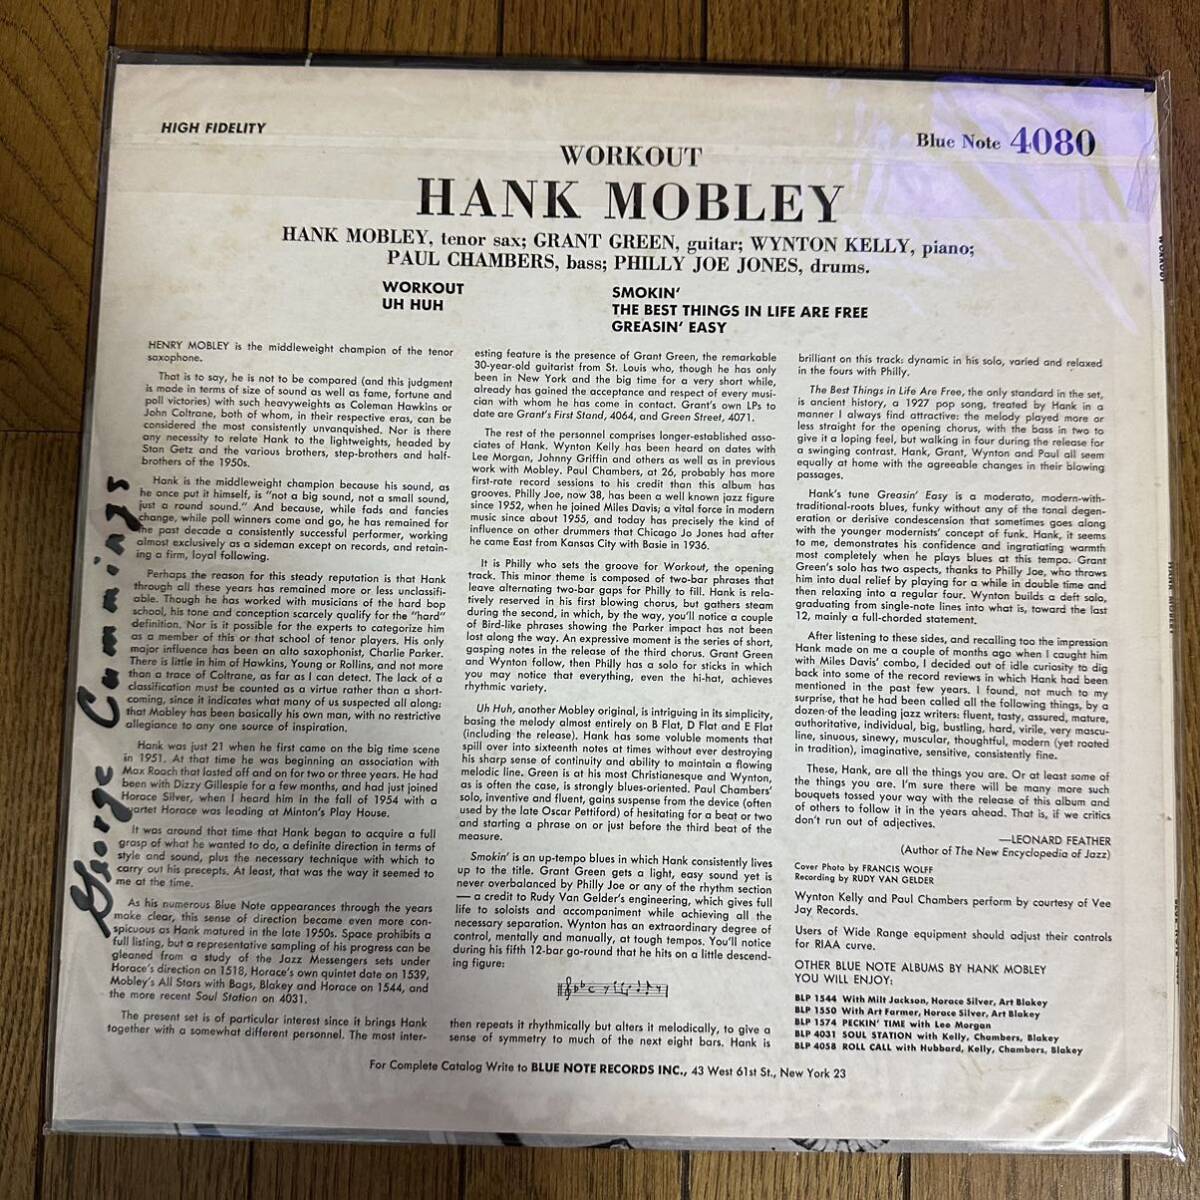 【LP】RVG Hank Mobley Work Out BLP4080 NYの画像4